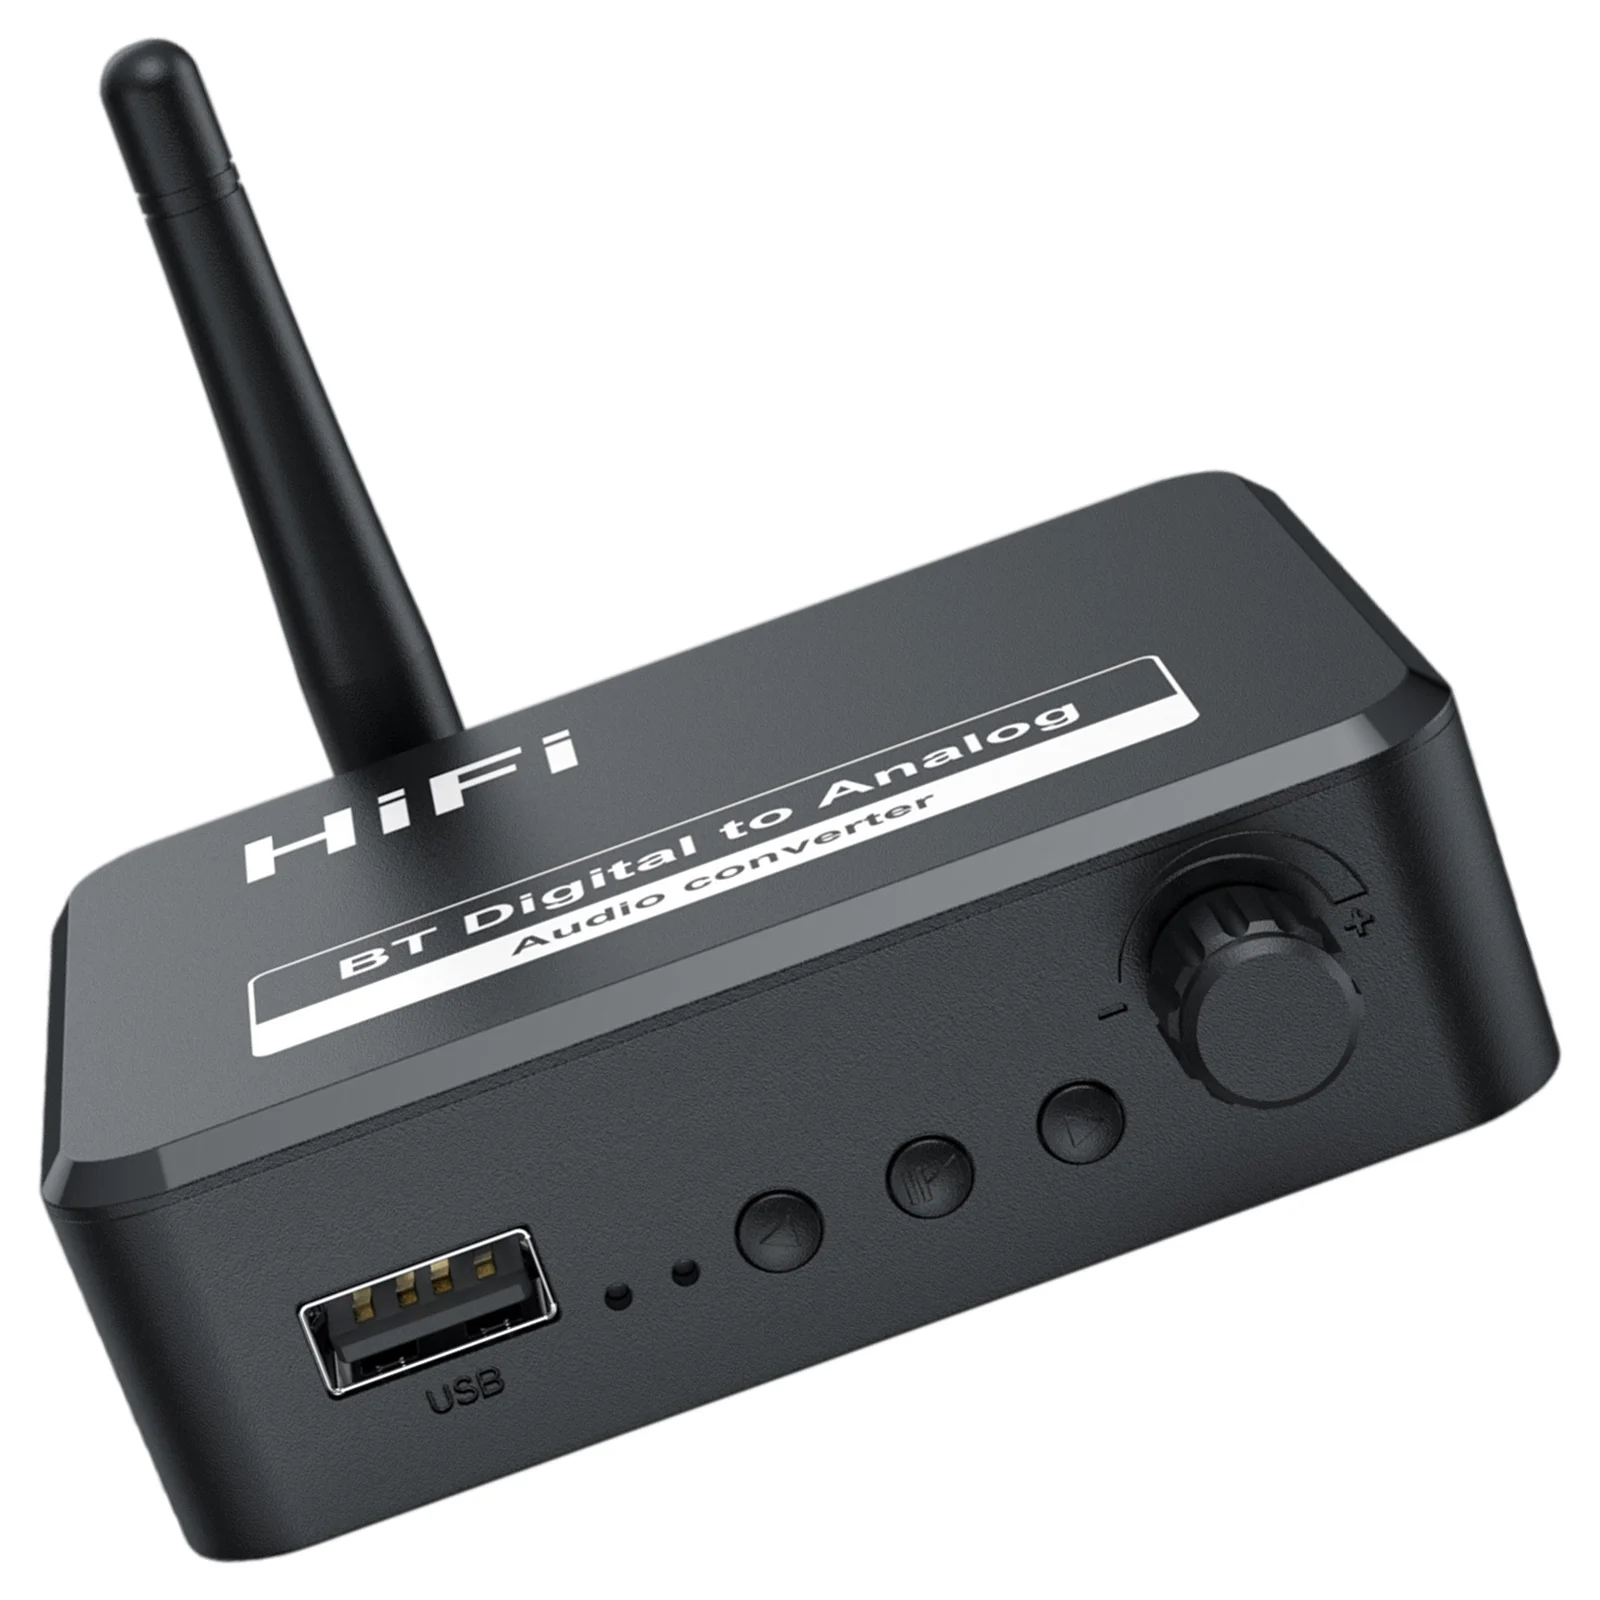  5.1 Receiver Receiver AUX/Optical/ Input Widely Used for TV/PC Low Latency  High-Performance  